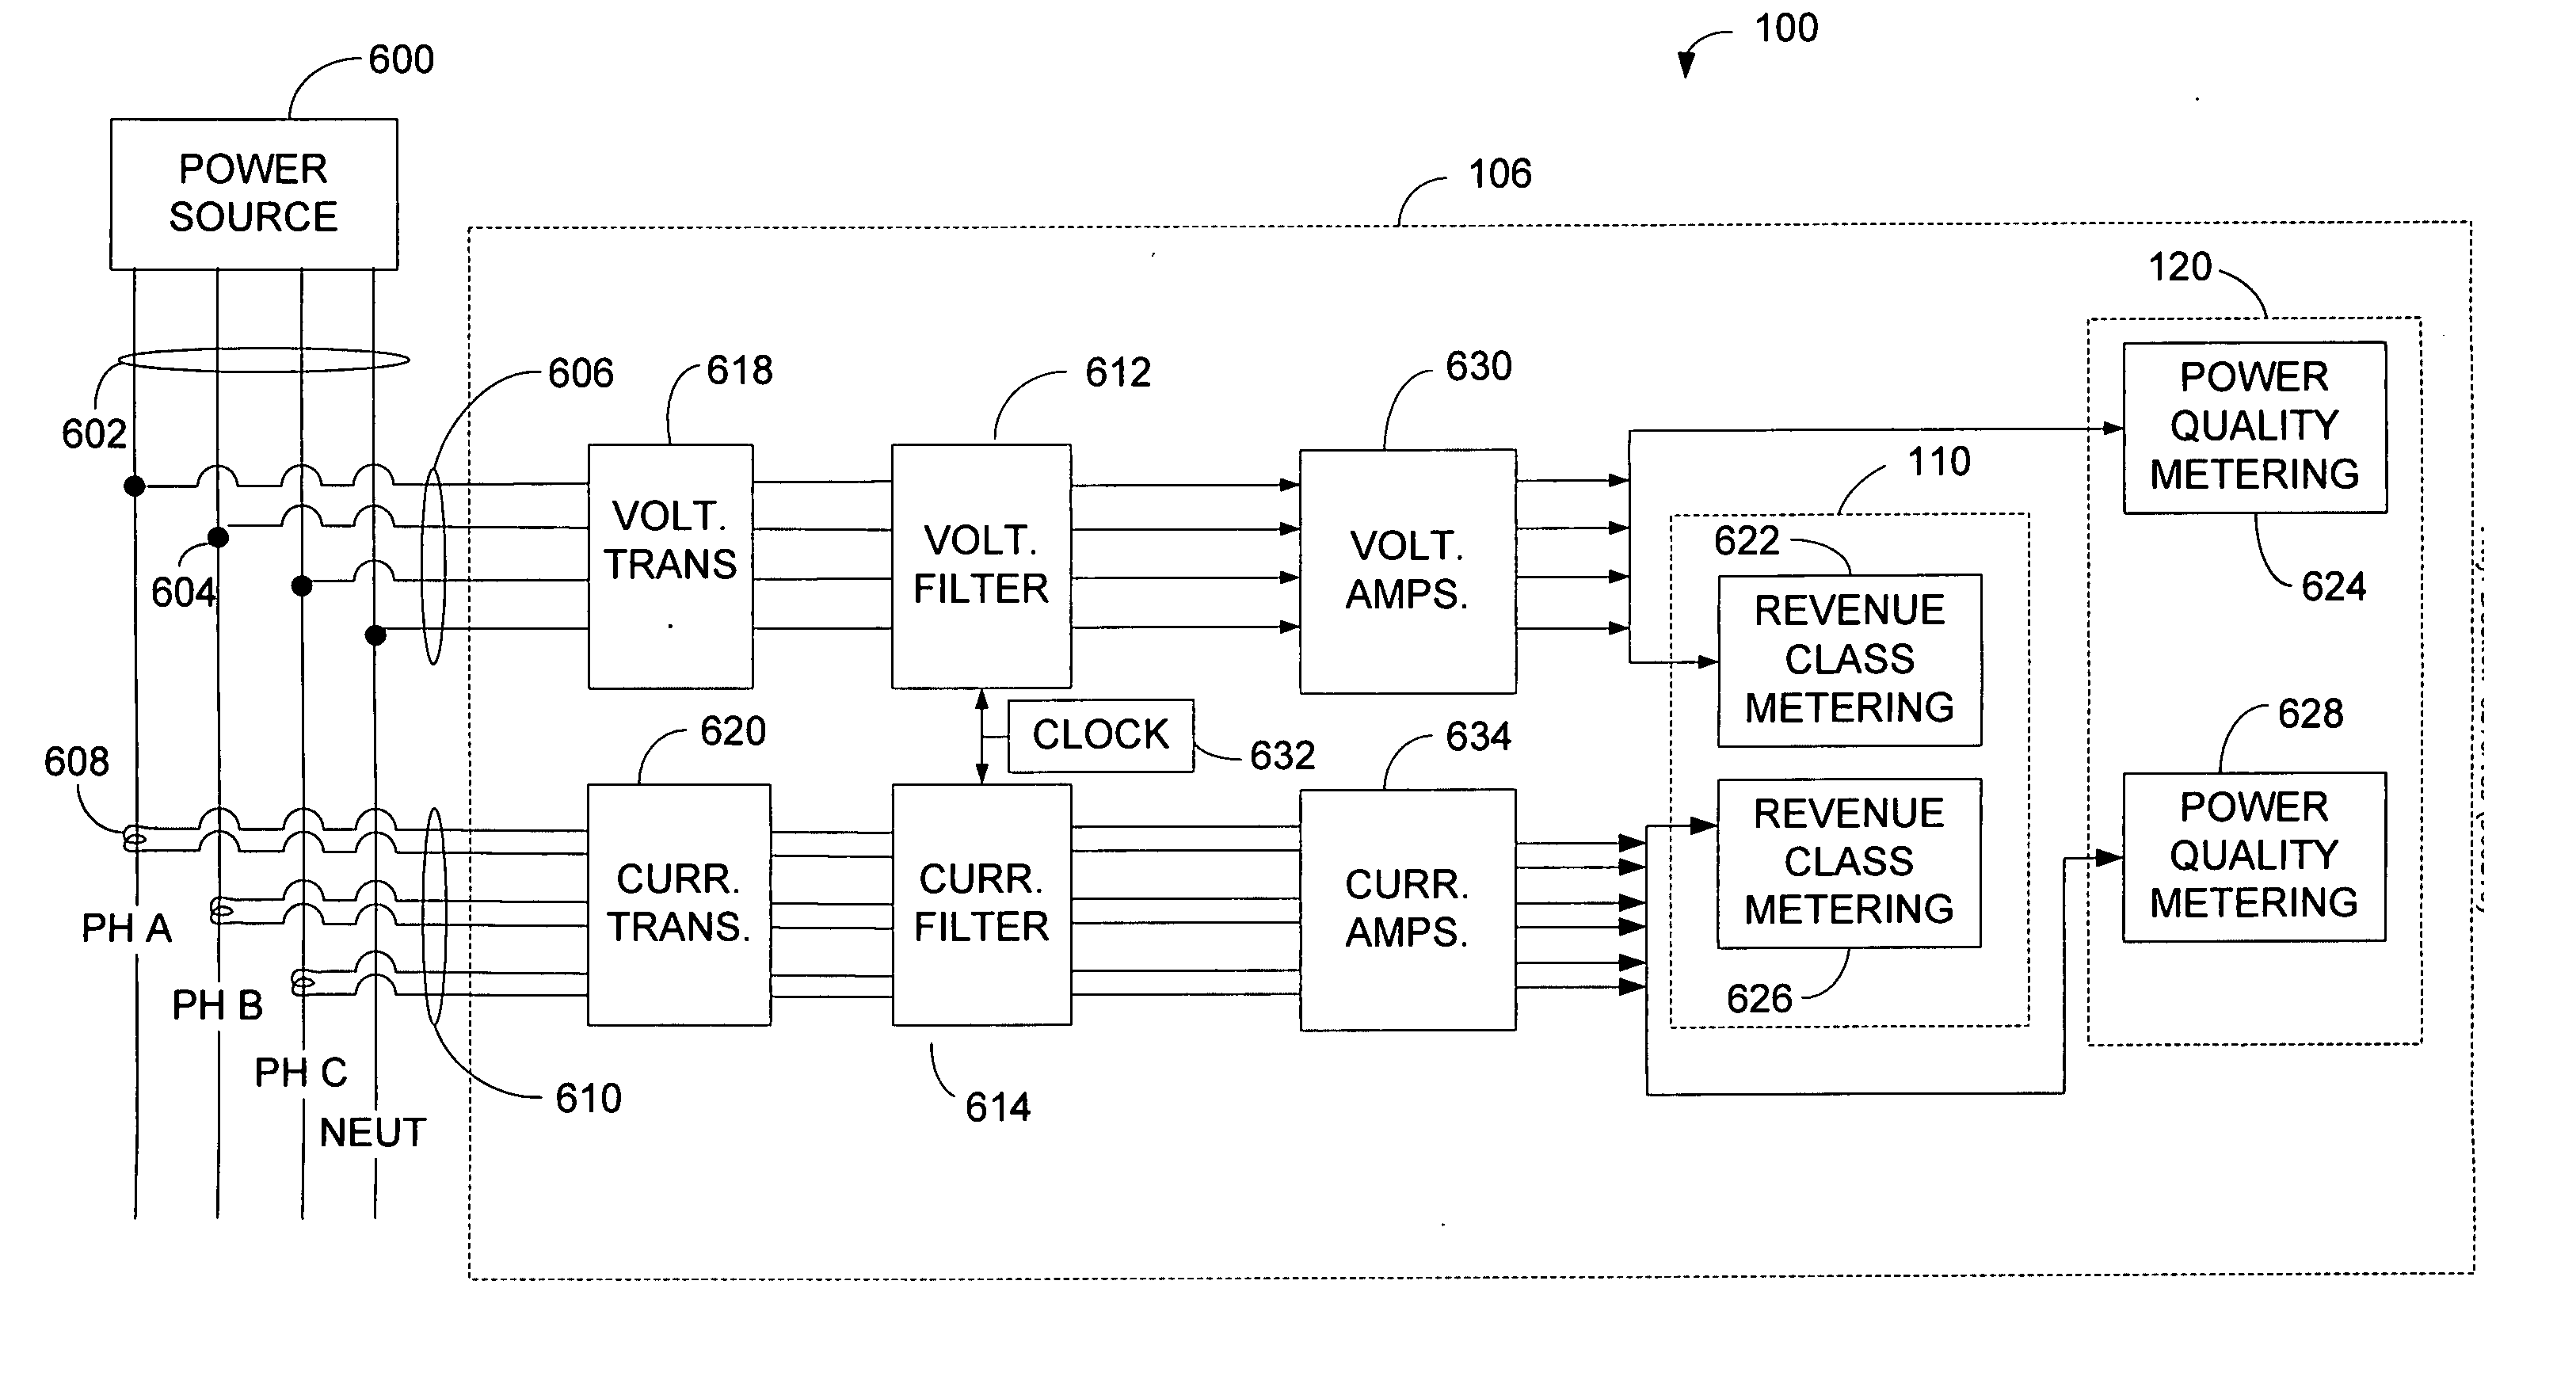 Revenue class power meter with frequency rejection